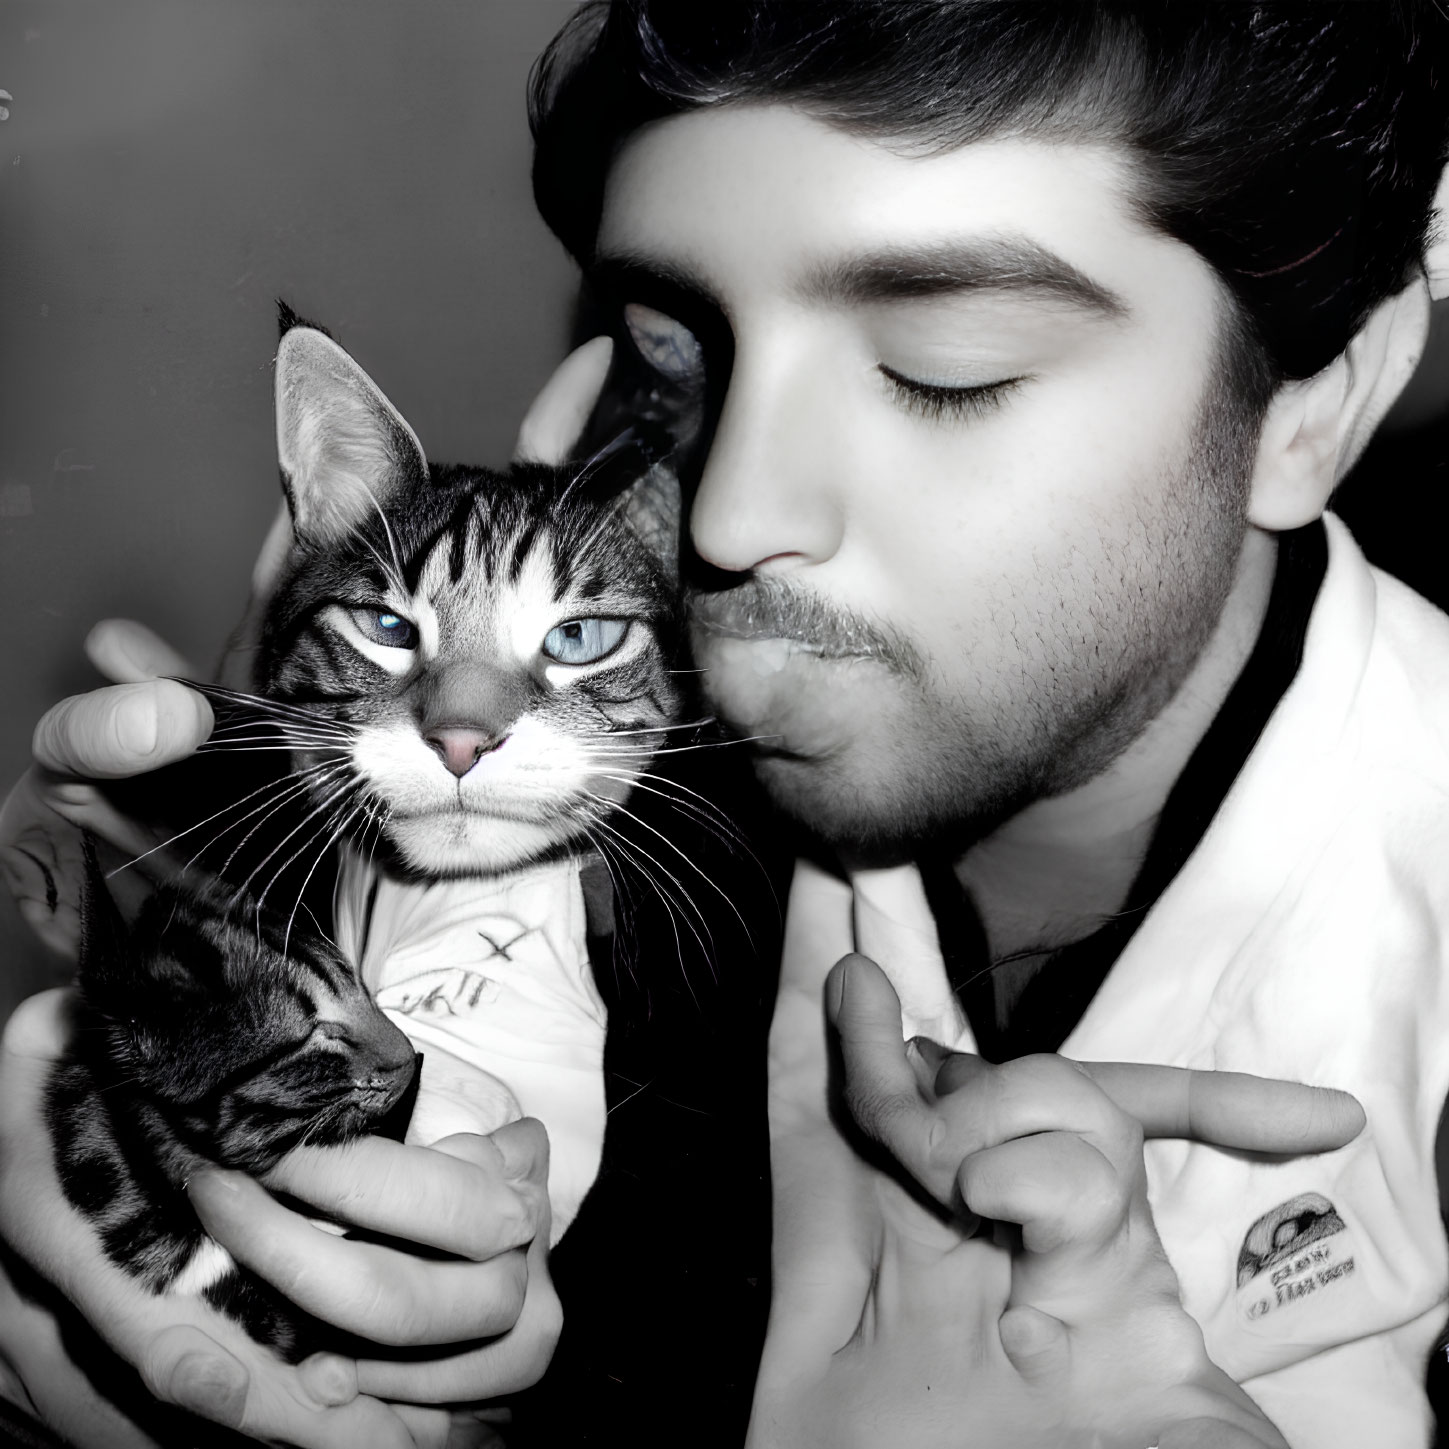 Person affectionately kissing large cat with smaller kitten in hand against grayscale backdrop